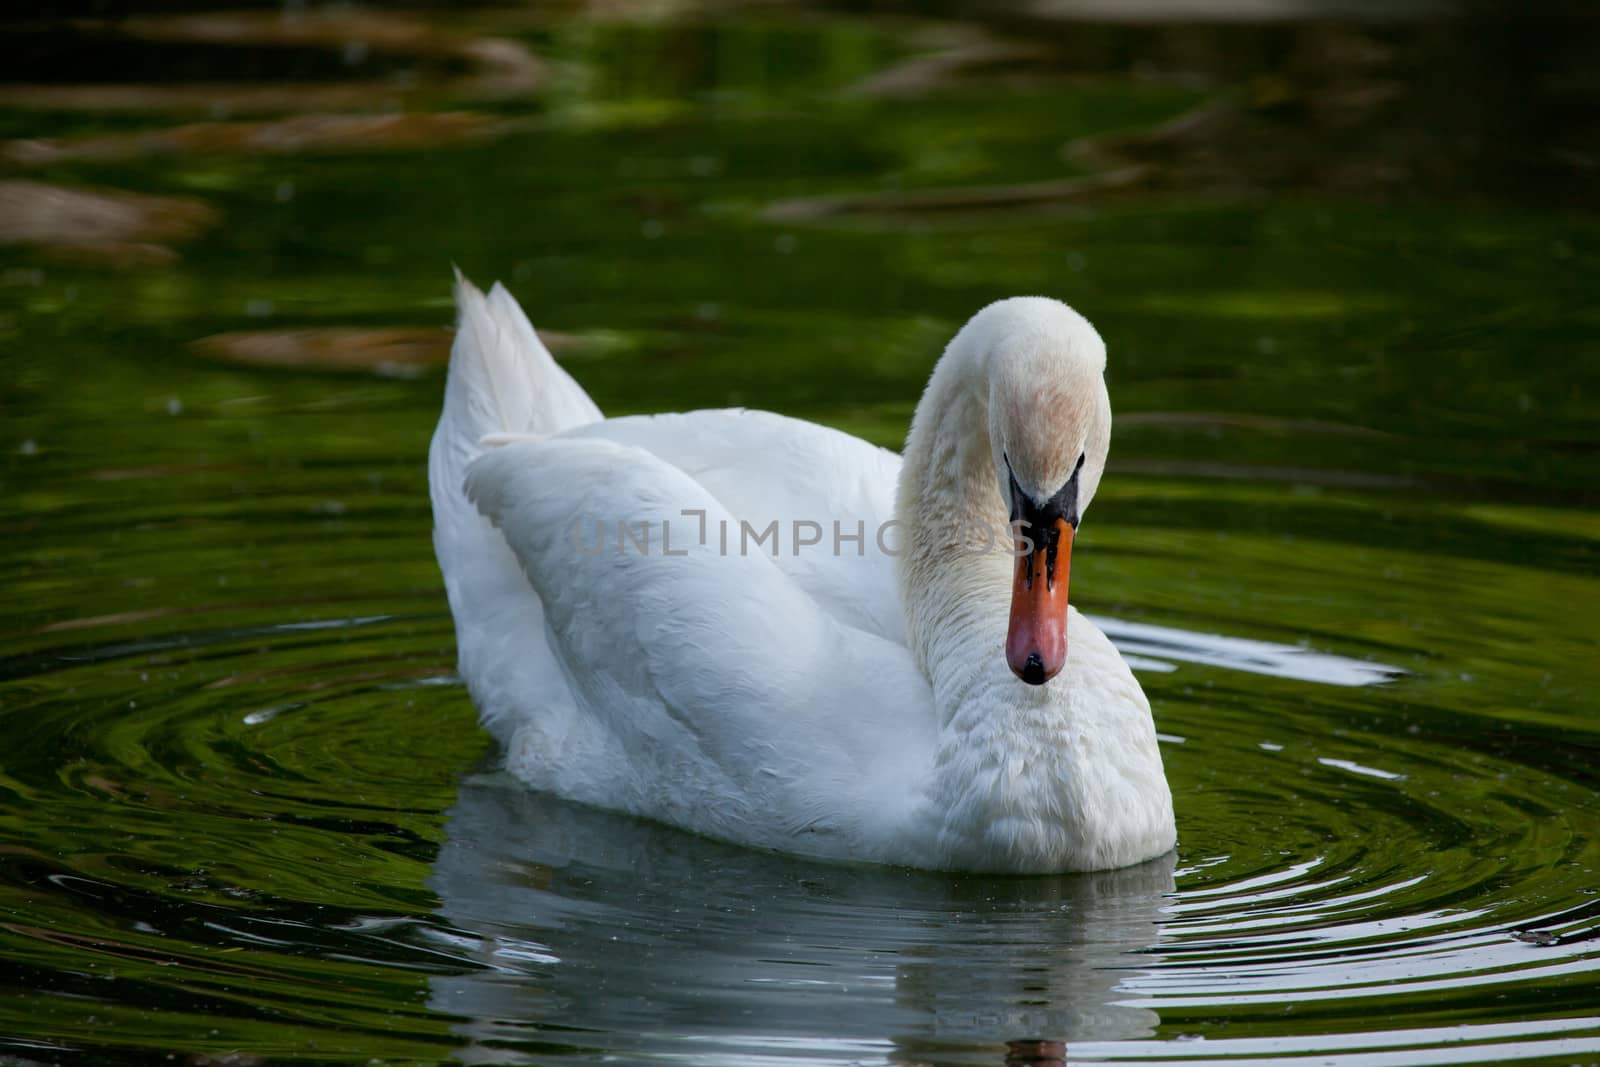 The adult white swan floats on water in the summer evening